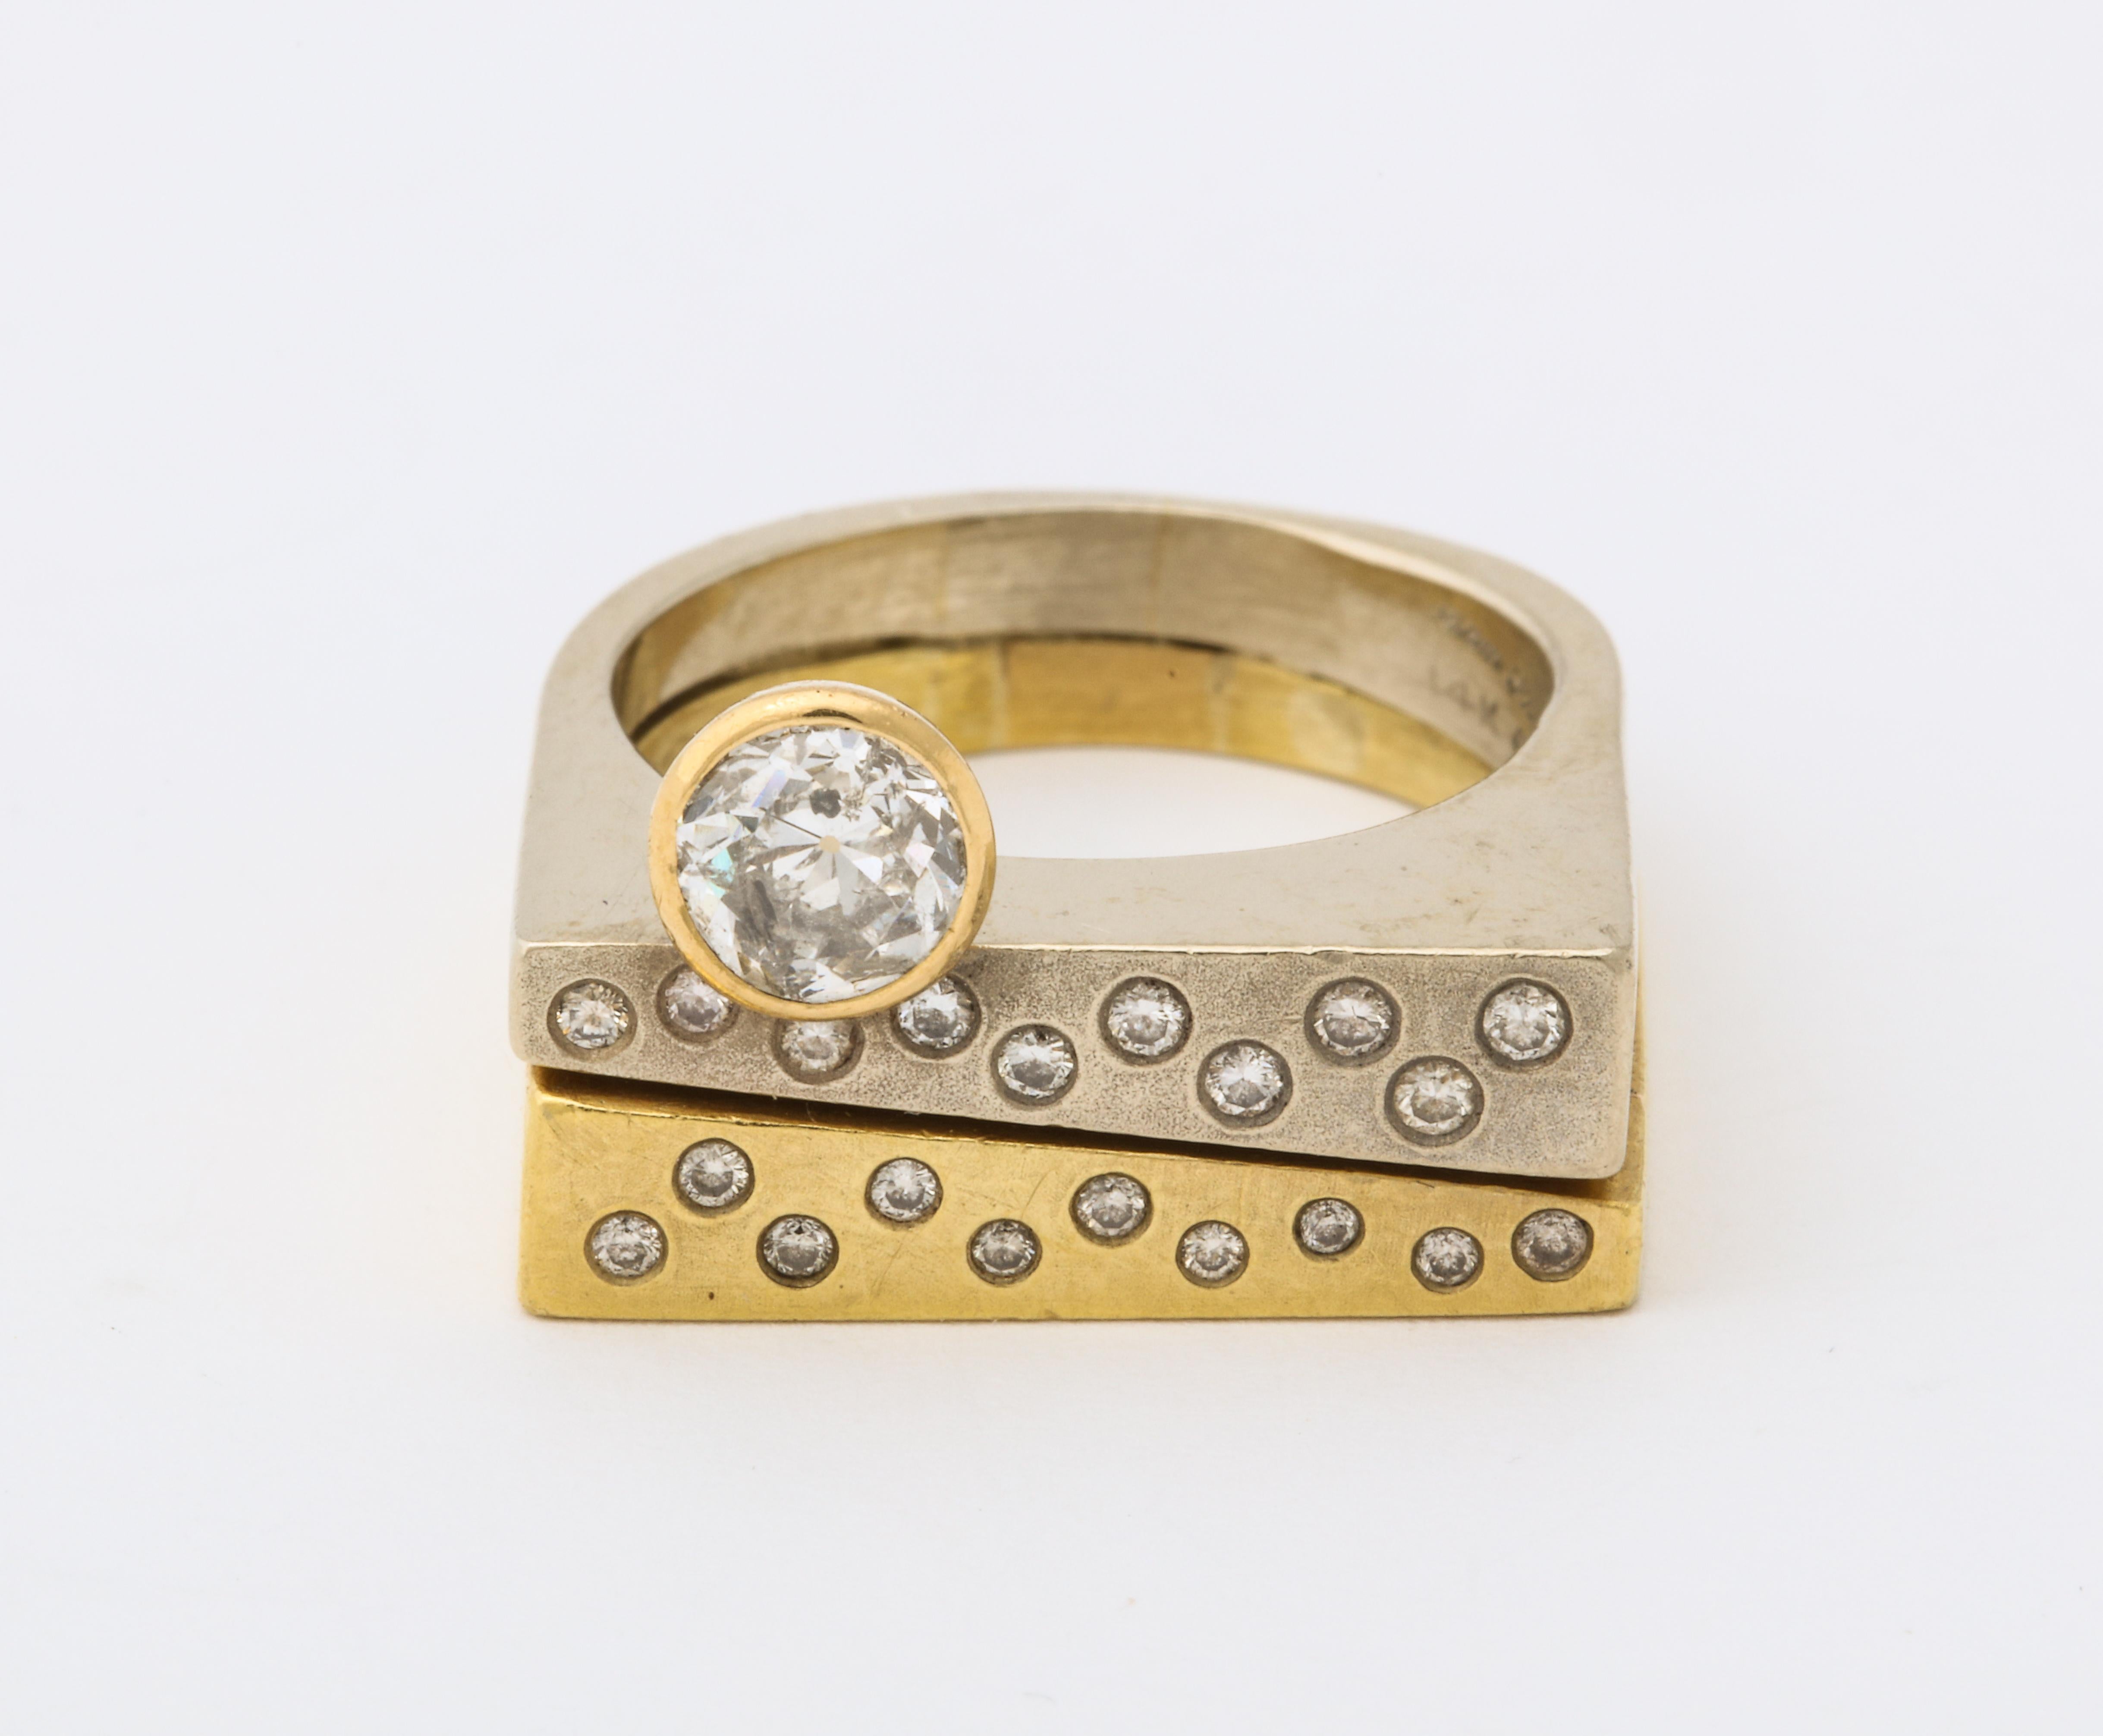 A wonderful modernist two color 18 k gold ring with a brilliant diamond atop of rows of pave diamonds